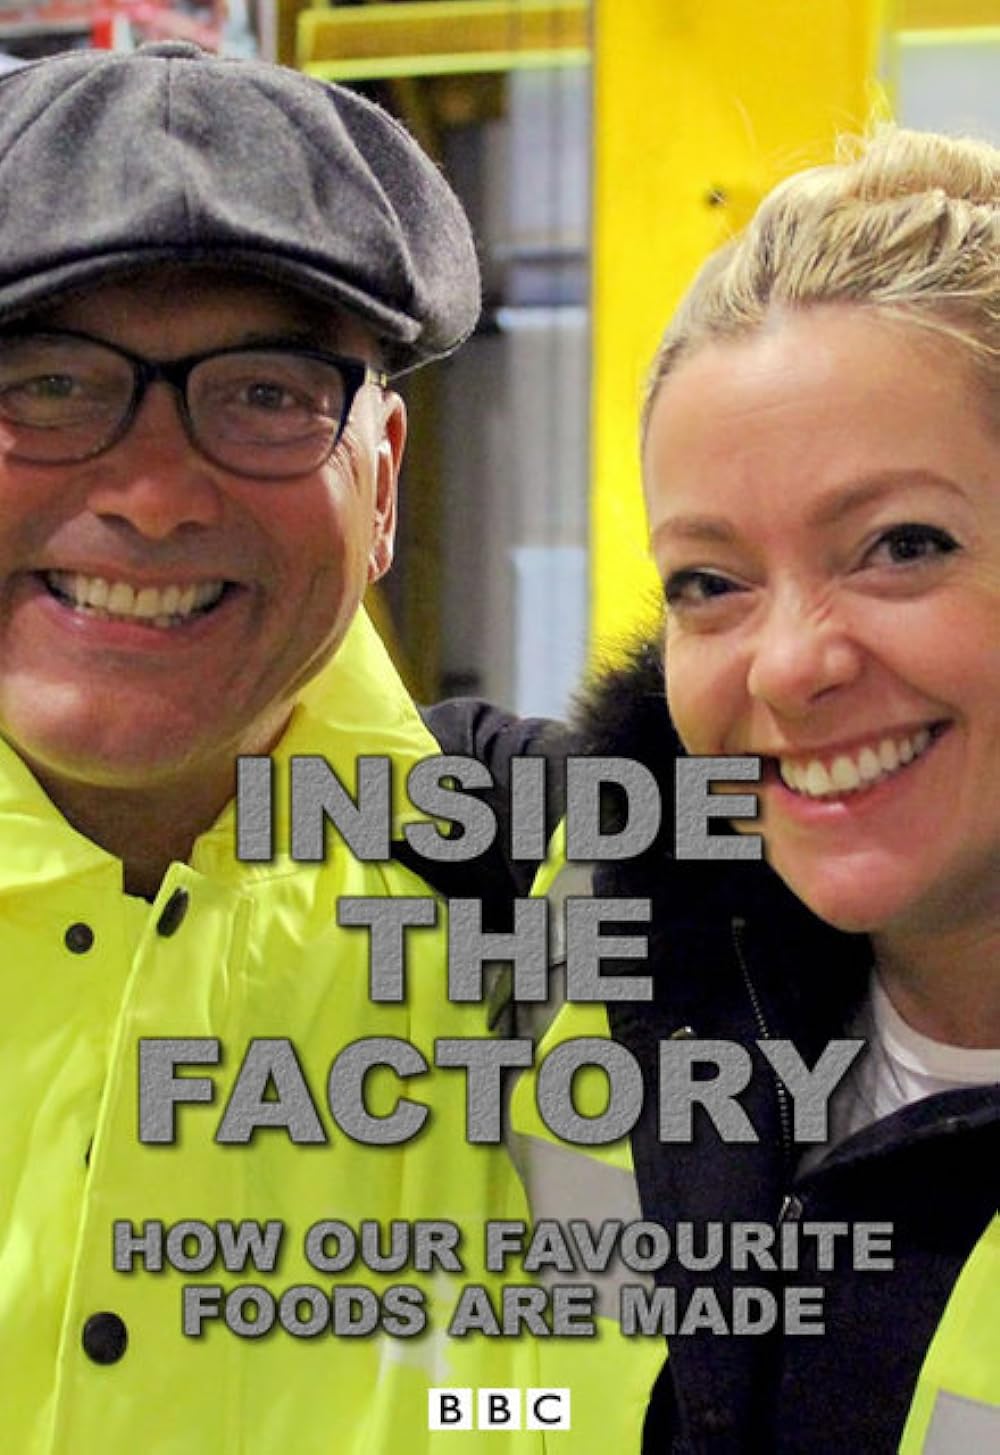 Inside the Factory: How Our Favorite Foods Are Made